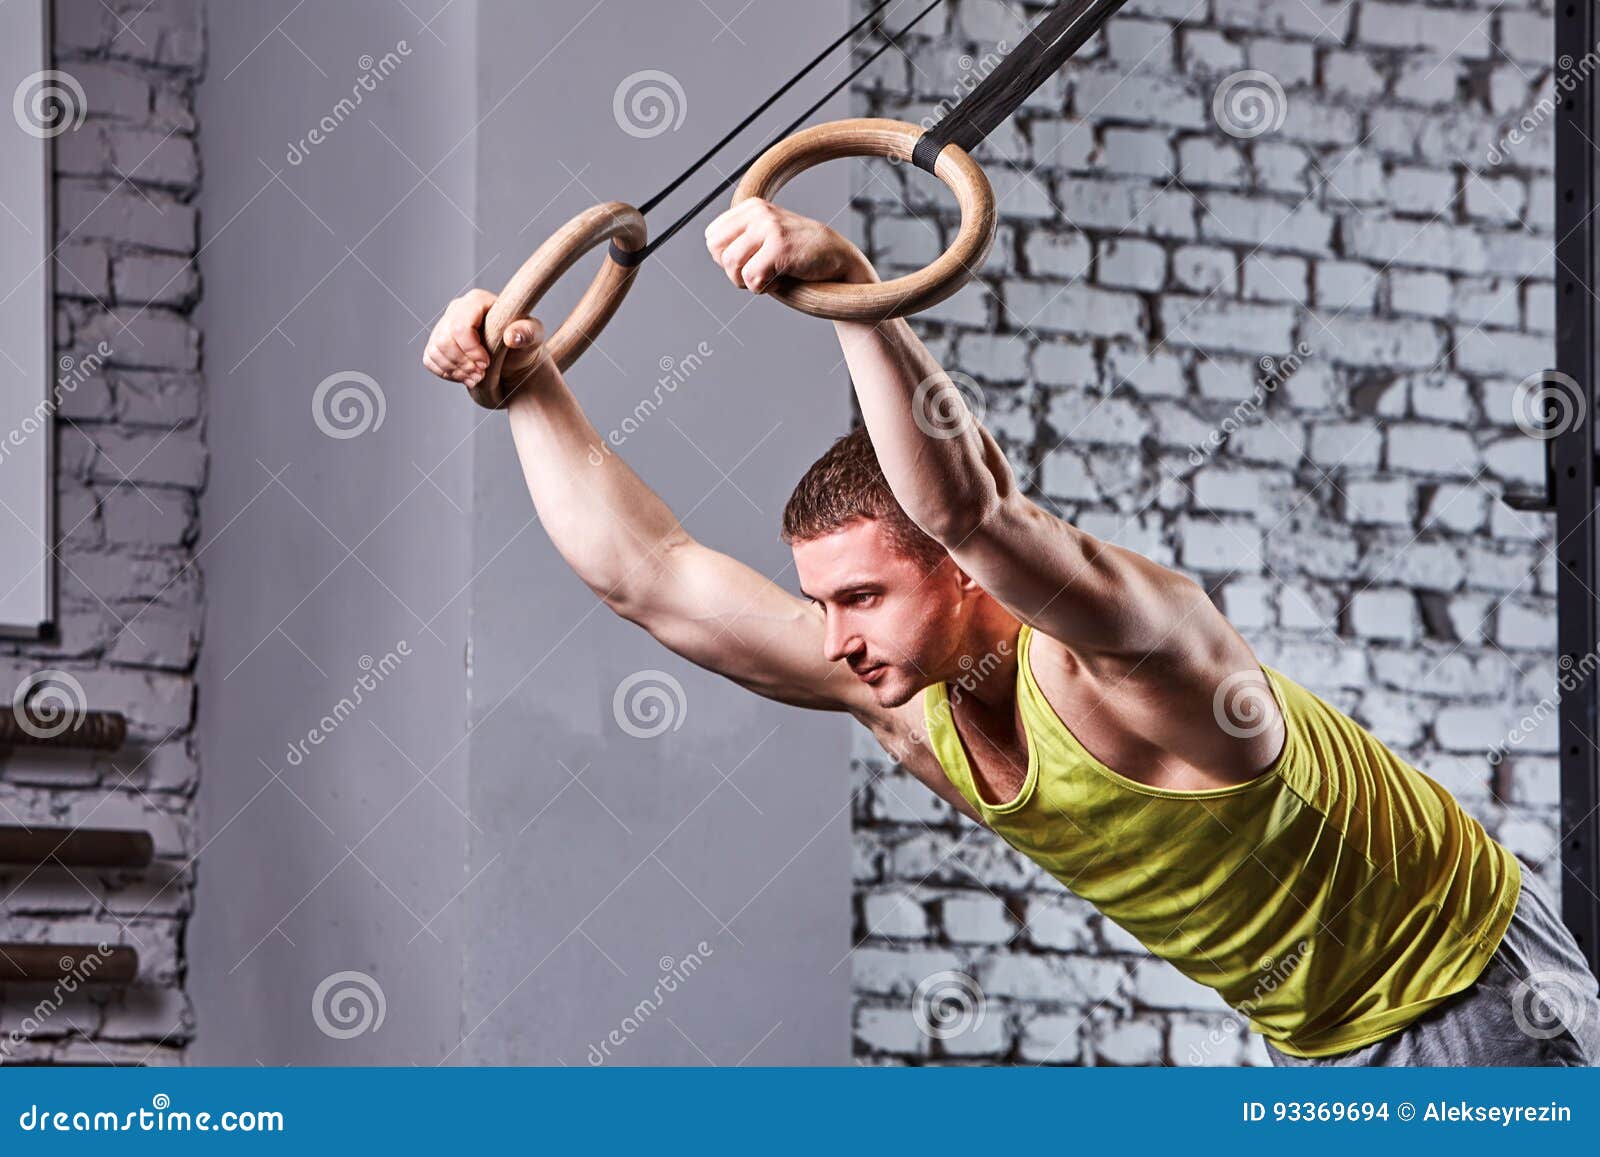 young athlete man in the sportwear pulling up on gymnastic rings against brick wall in the cross fit gym.